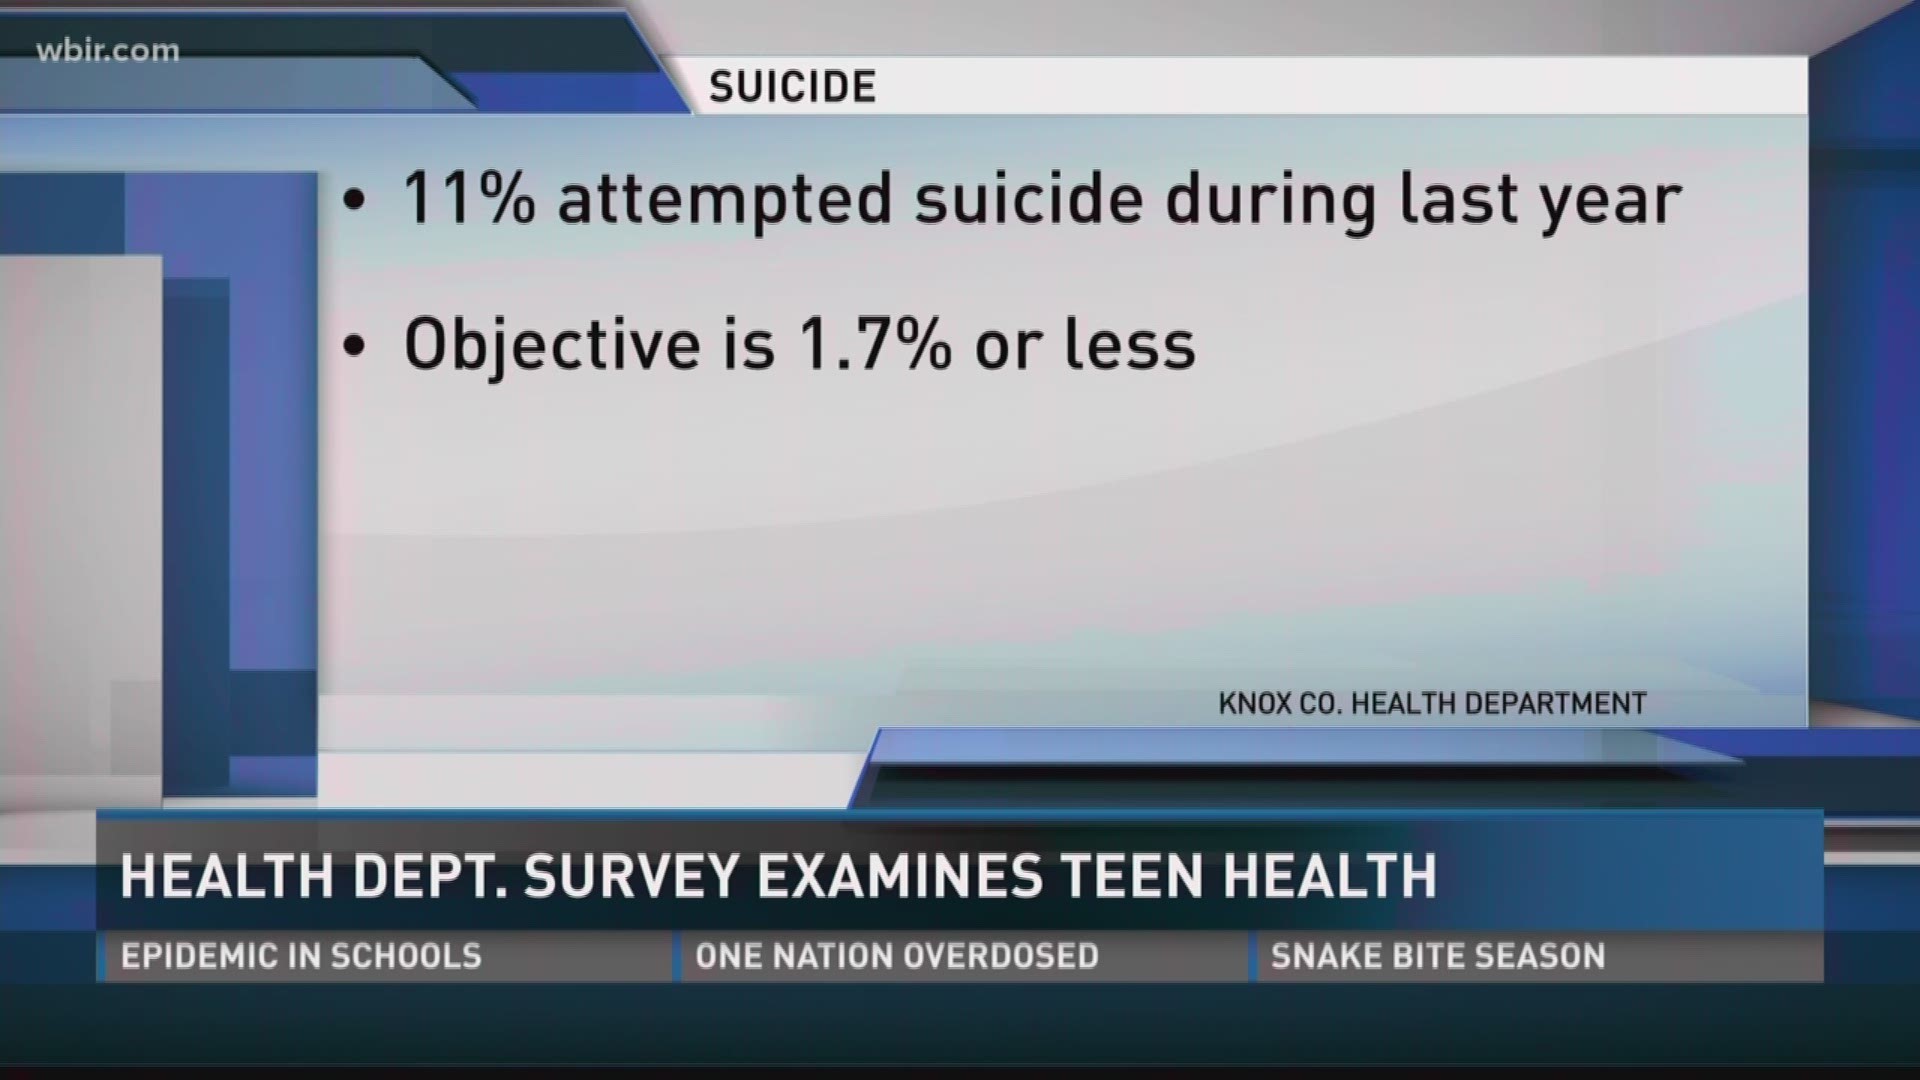 A survey of more than 1,100 Knox County High schoolers reveals details about their health including their feelings on depression, suicide, and drug use.